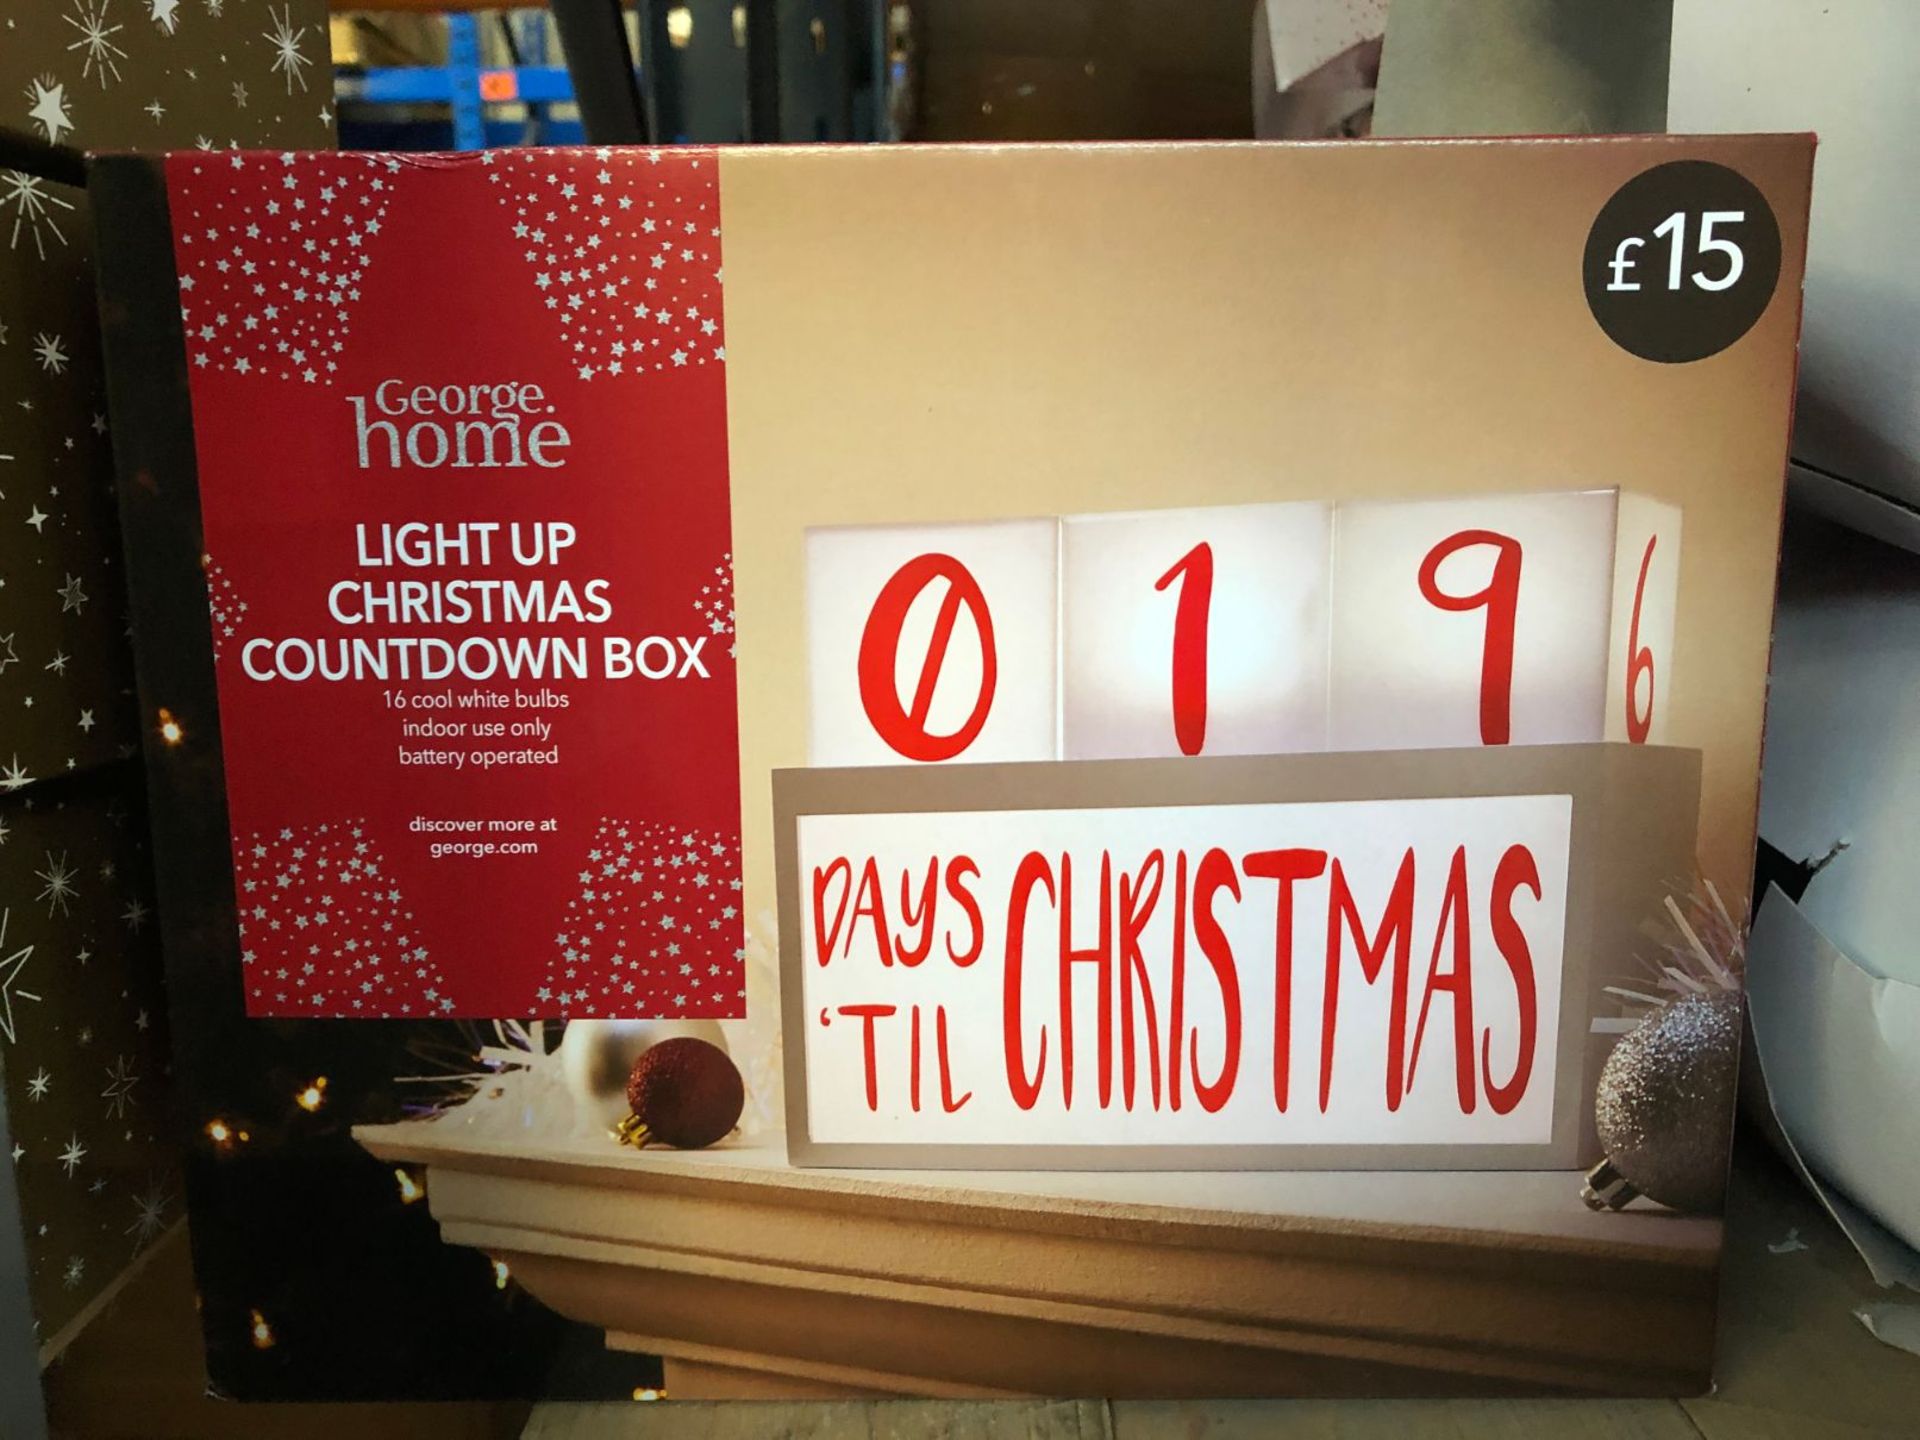 5 X LIGHT UP CHRISTMAS COUNTDOWN BOXES / COMINED RRP £75.00 (IMAGES ARE FOR ILLUSTRATION PURPOSES